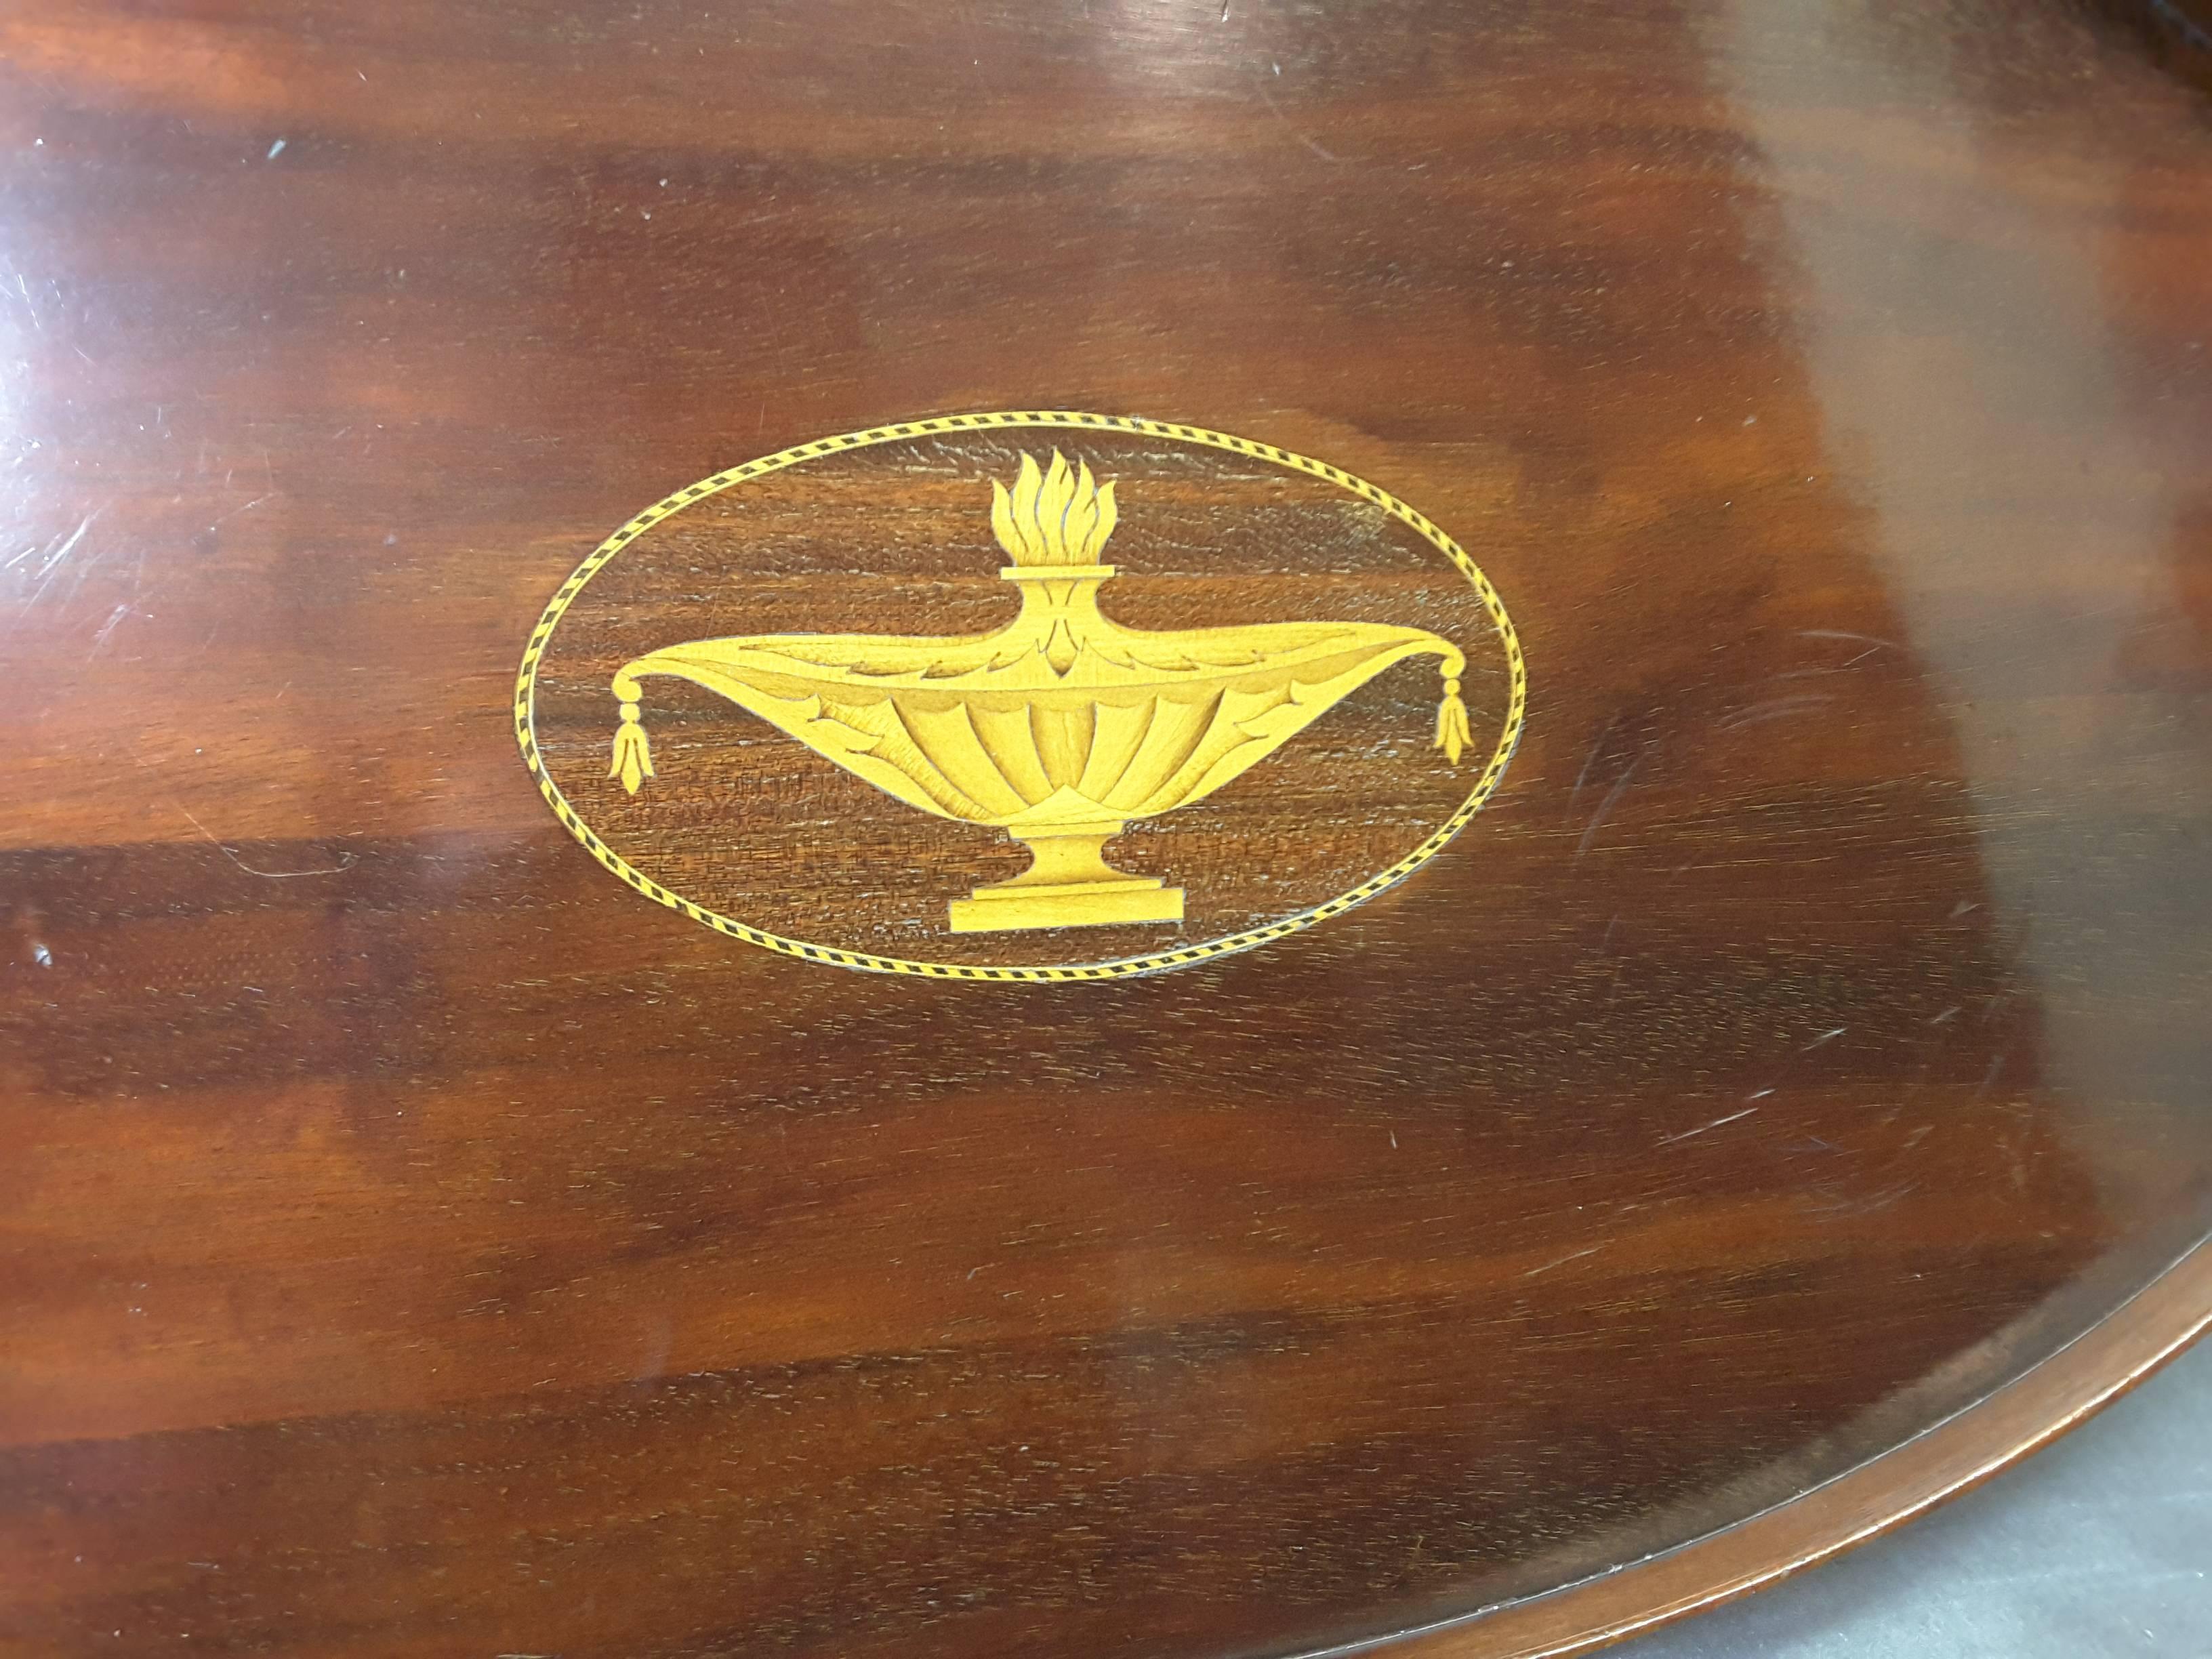 Edwardian mahogany serving tray by Manning Bowman & Co. Made in Middletown, Connecticut. An Oval tray with solid brass handles, with a Grecian urn inlaid in the centre, raised gallery edge, Original label and Impressed stamp on the bottom. There are